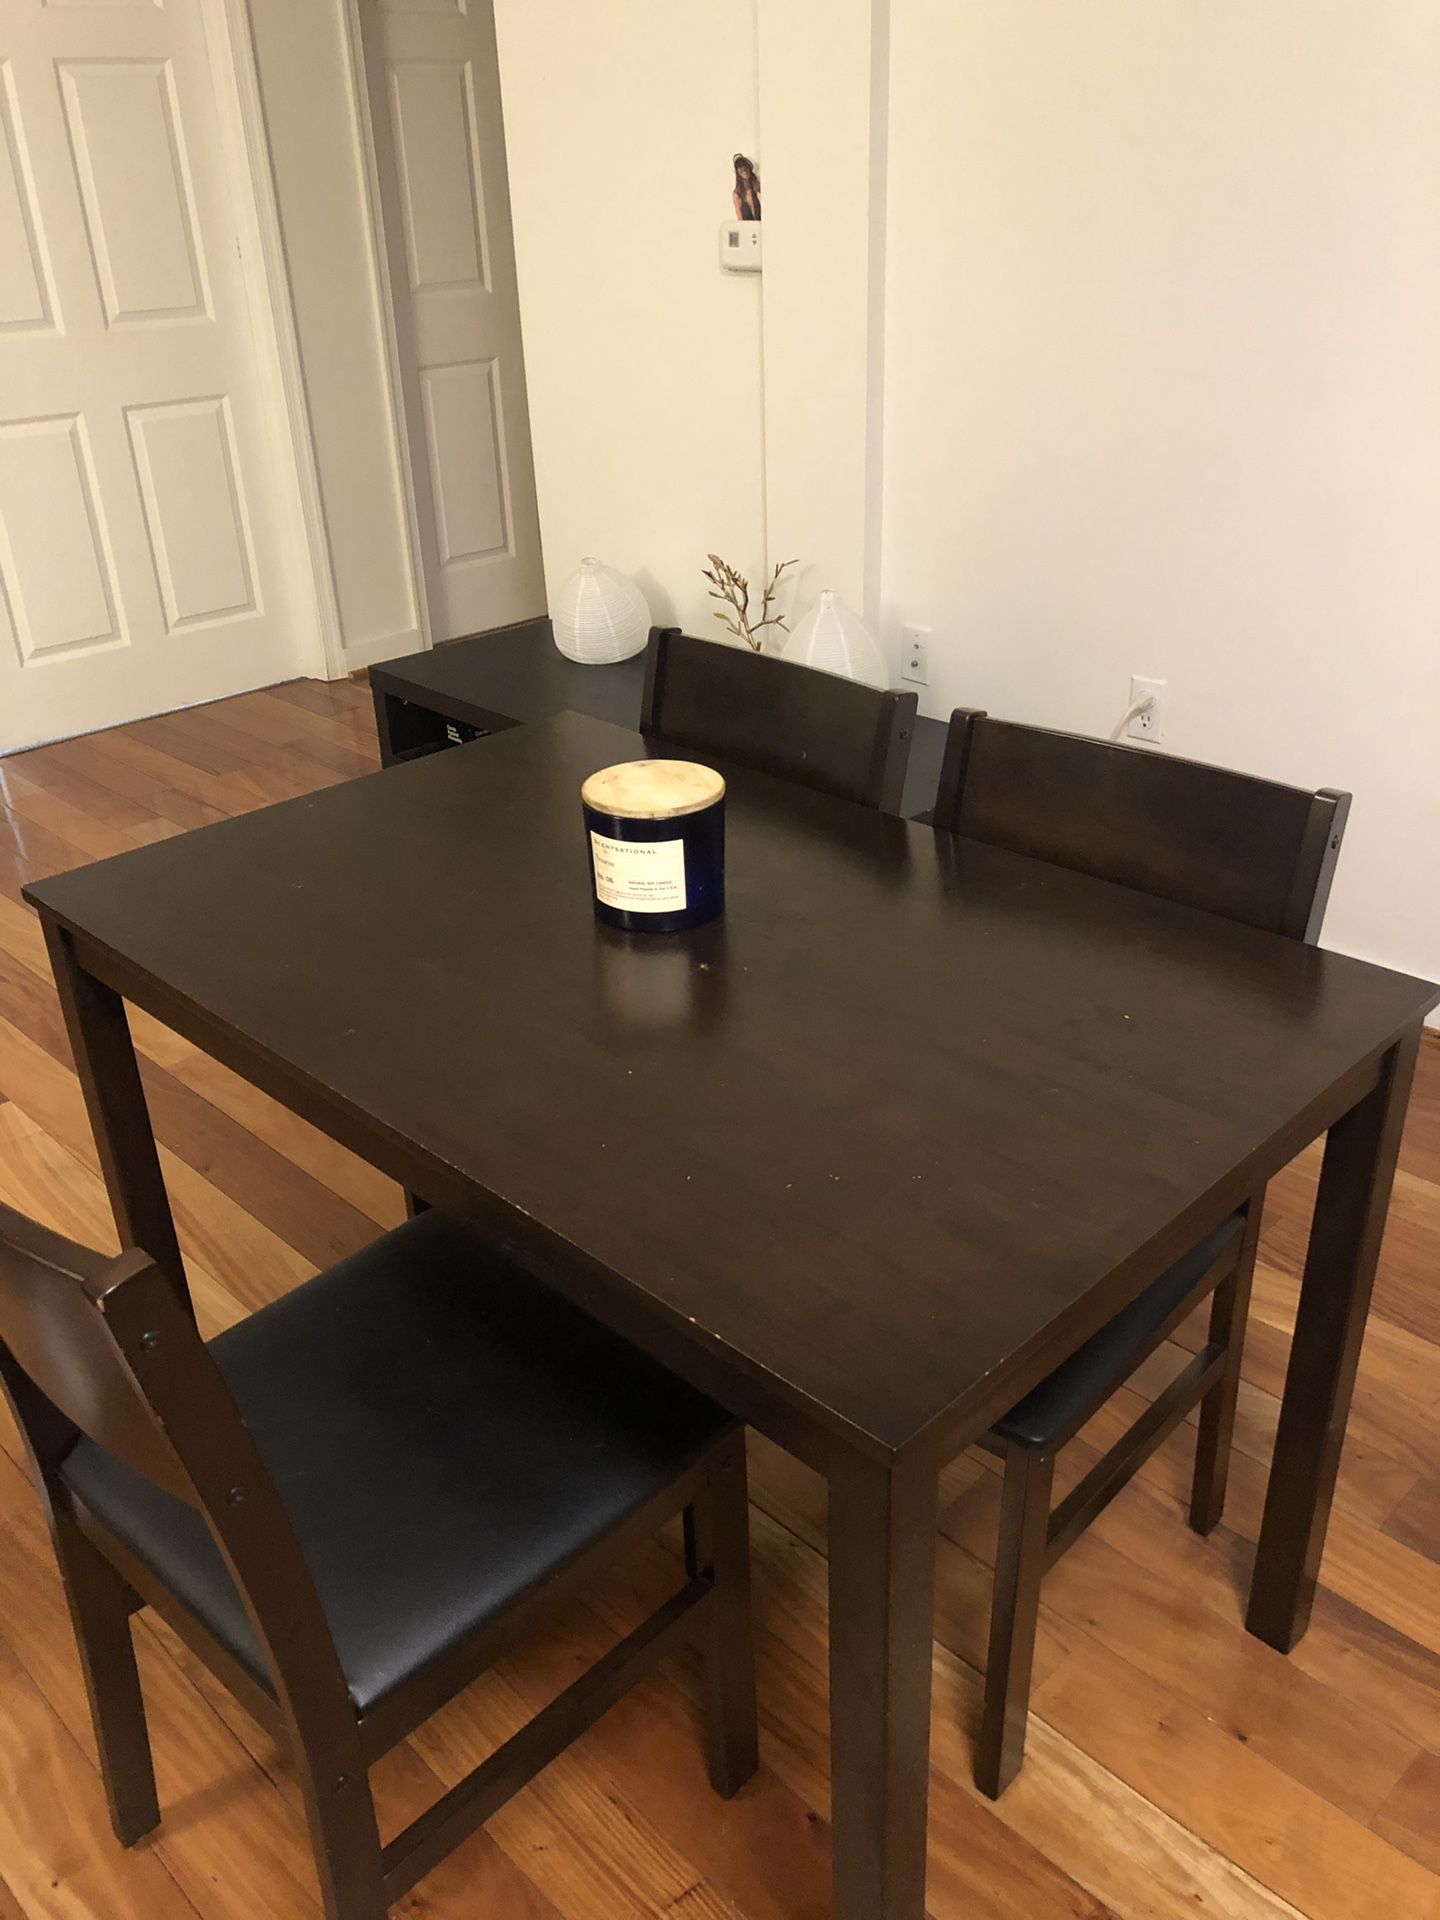 Dining table with three chairs